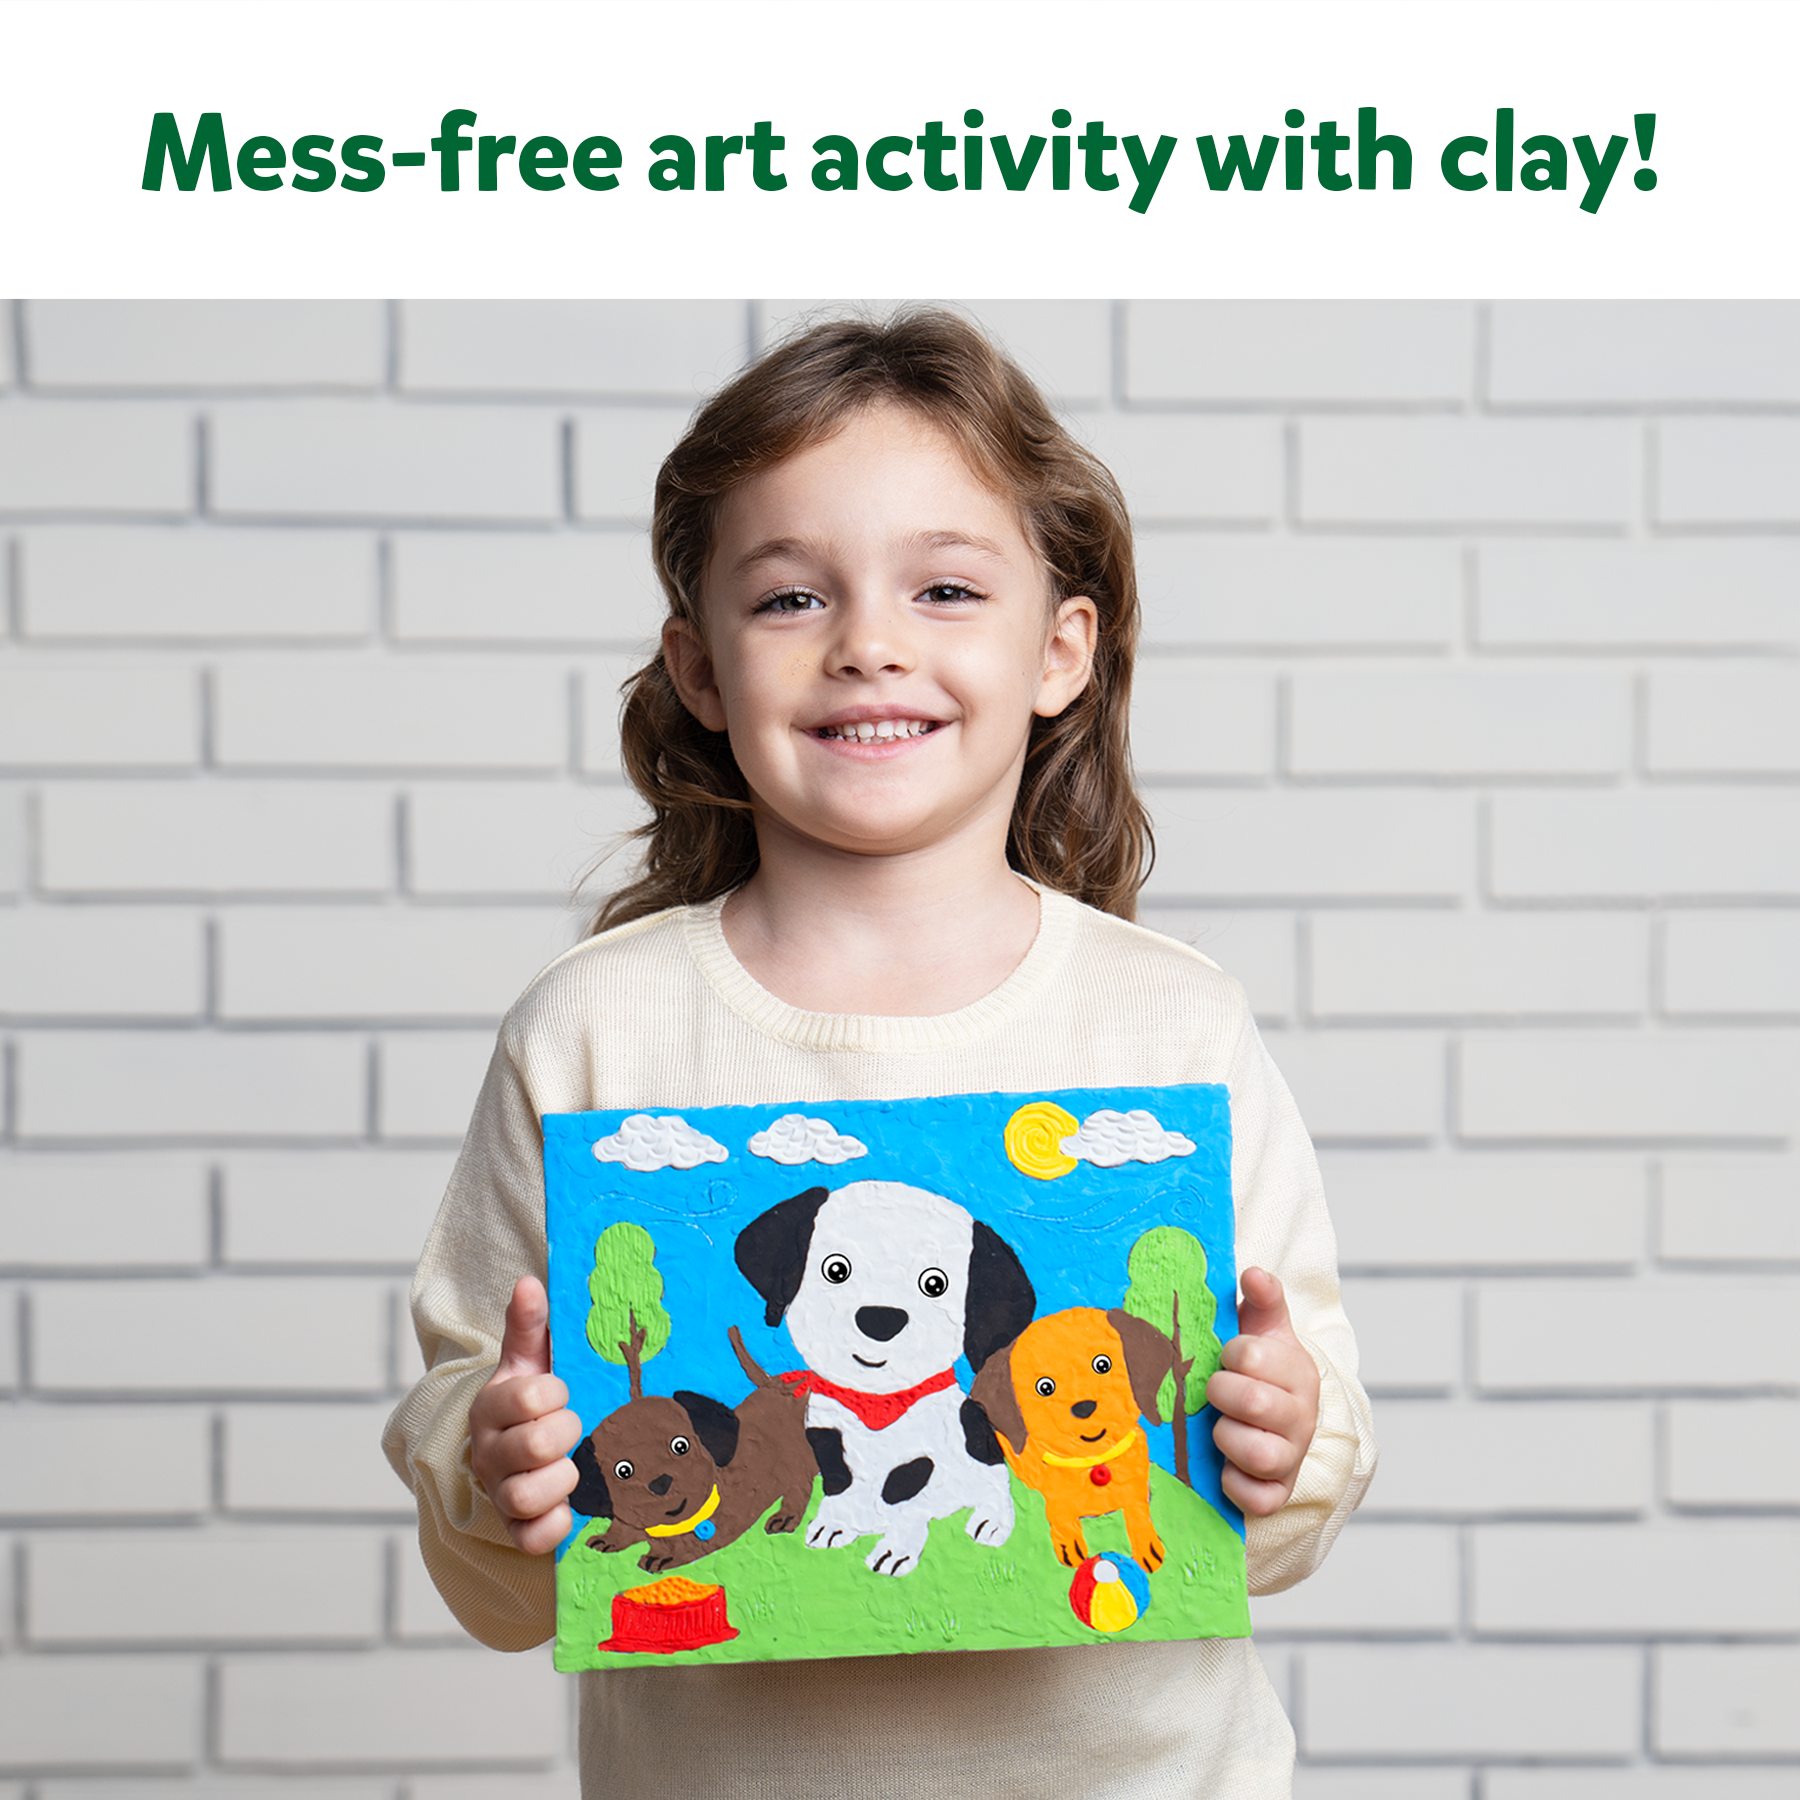 Skillmatics Art & Craft Kit - Colour with Clay, No Mess Art, Create a Clay Canvas Of Pups at The Park, Gifts for Ages 5 to 12